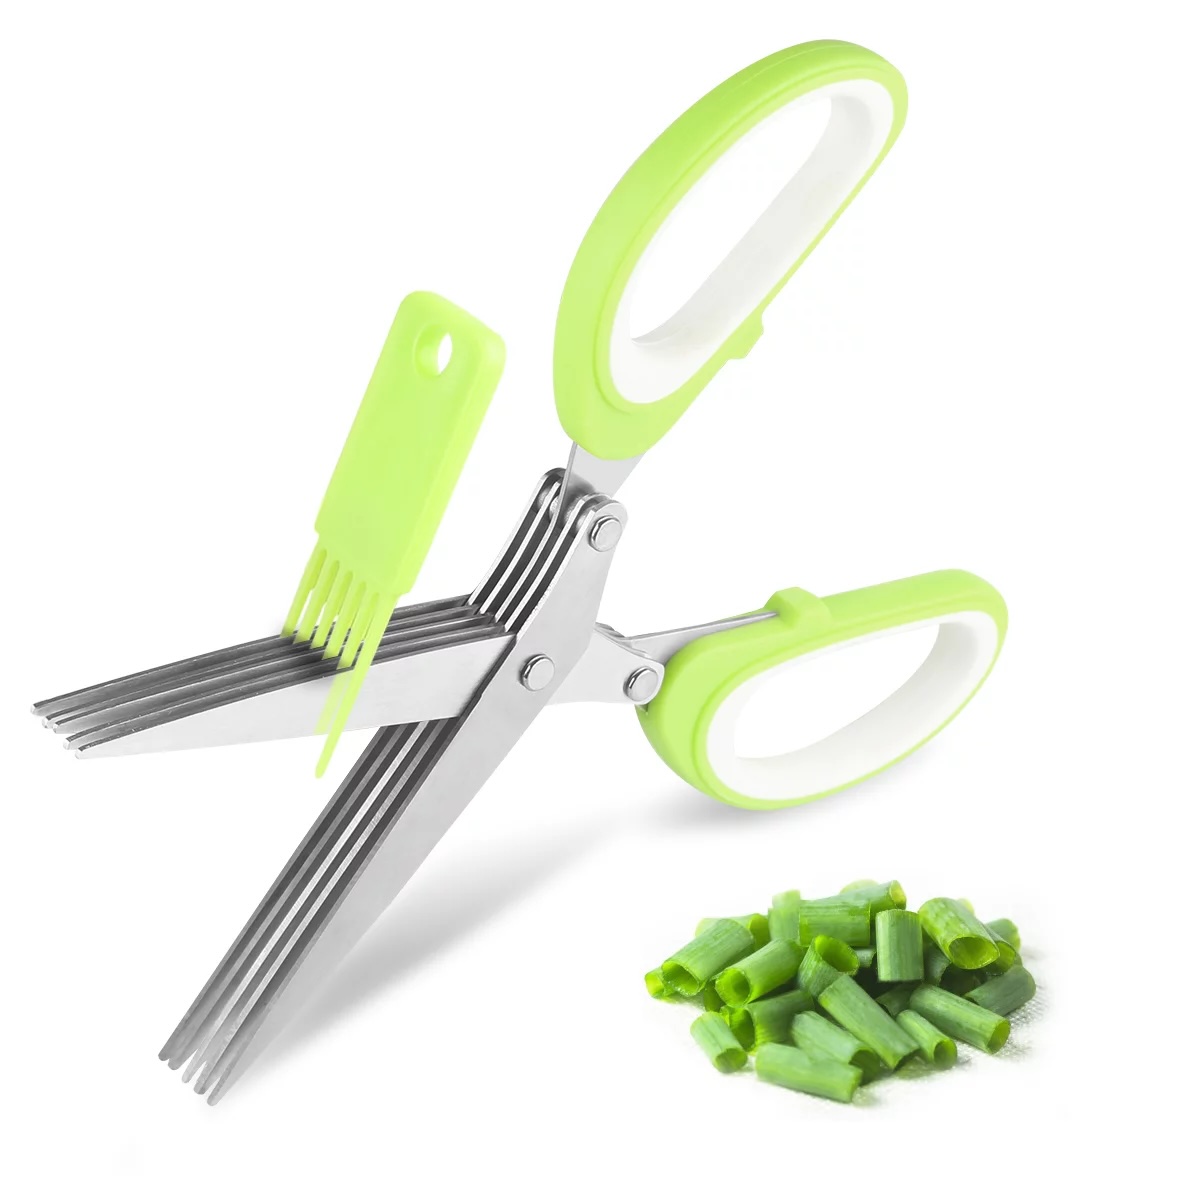 Herb Scissors Review: The Perfect Kitchen Tool for Effortless Herb Cutting